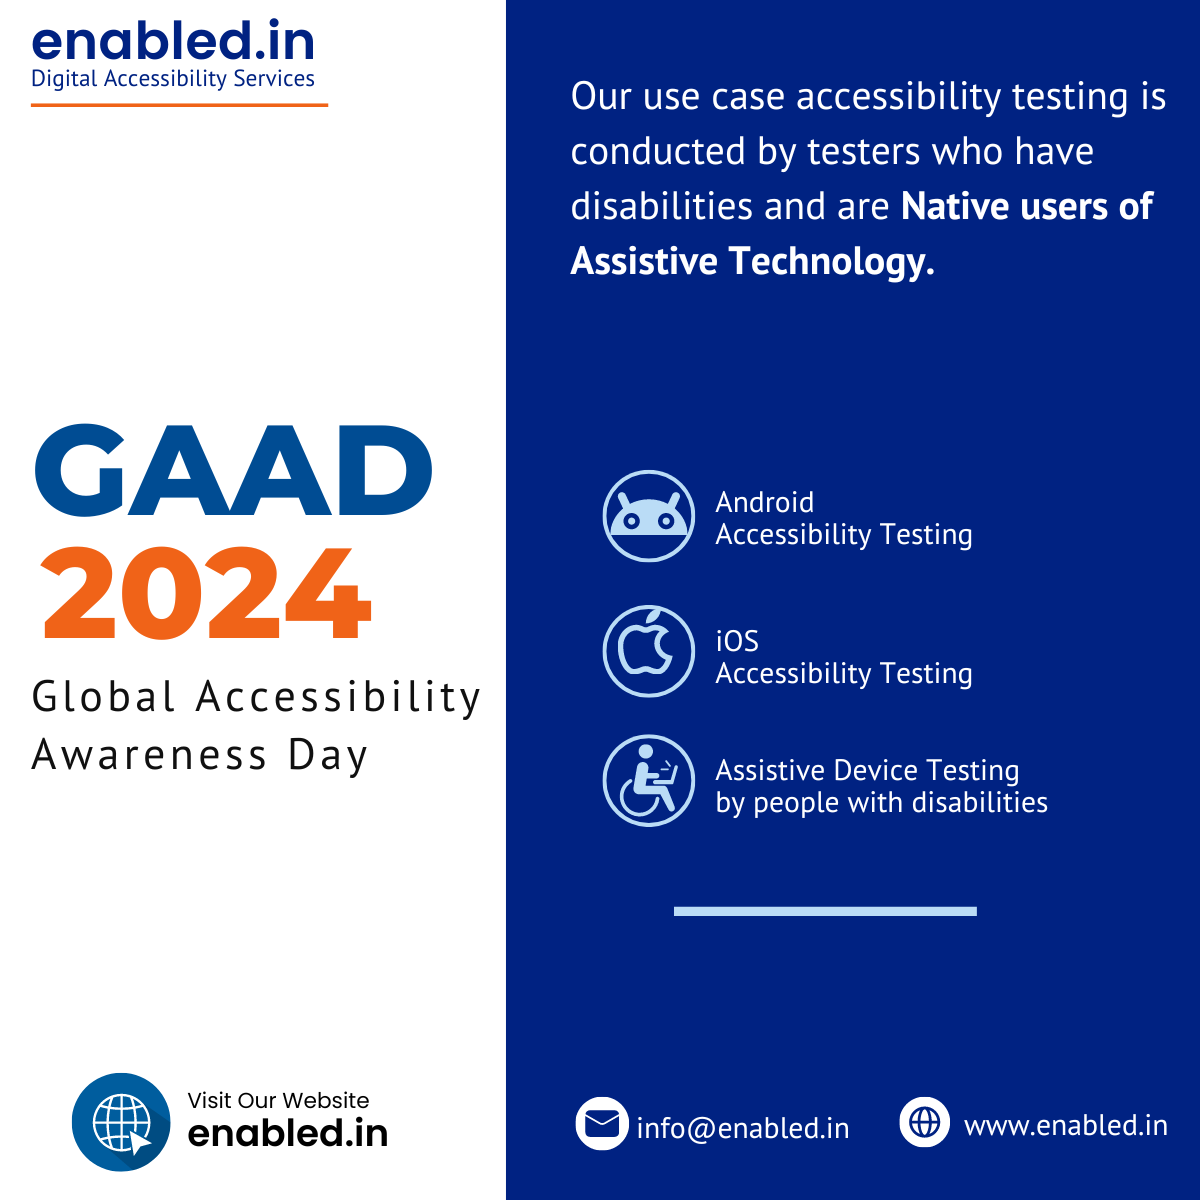 GAAD Accessibility Awareness - Our use case accessibility testing is conducted by testers who have disabilities and are native users of assistive technology.